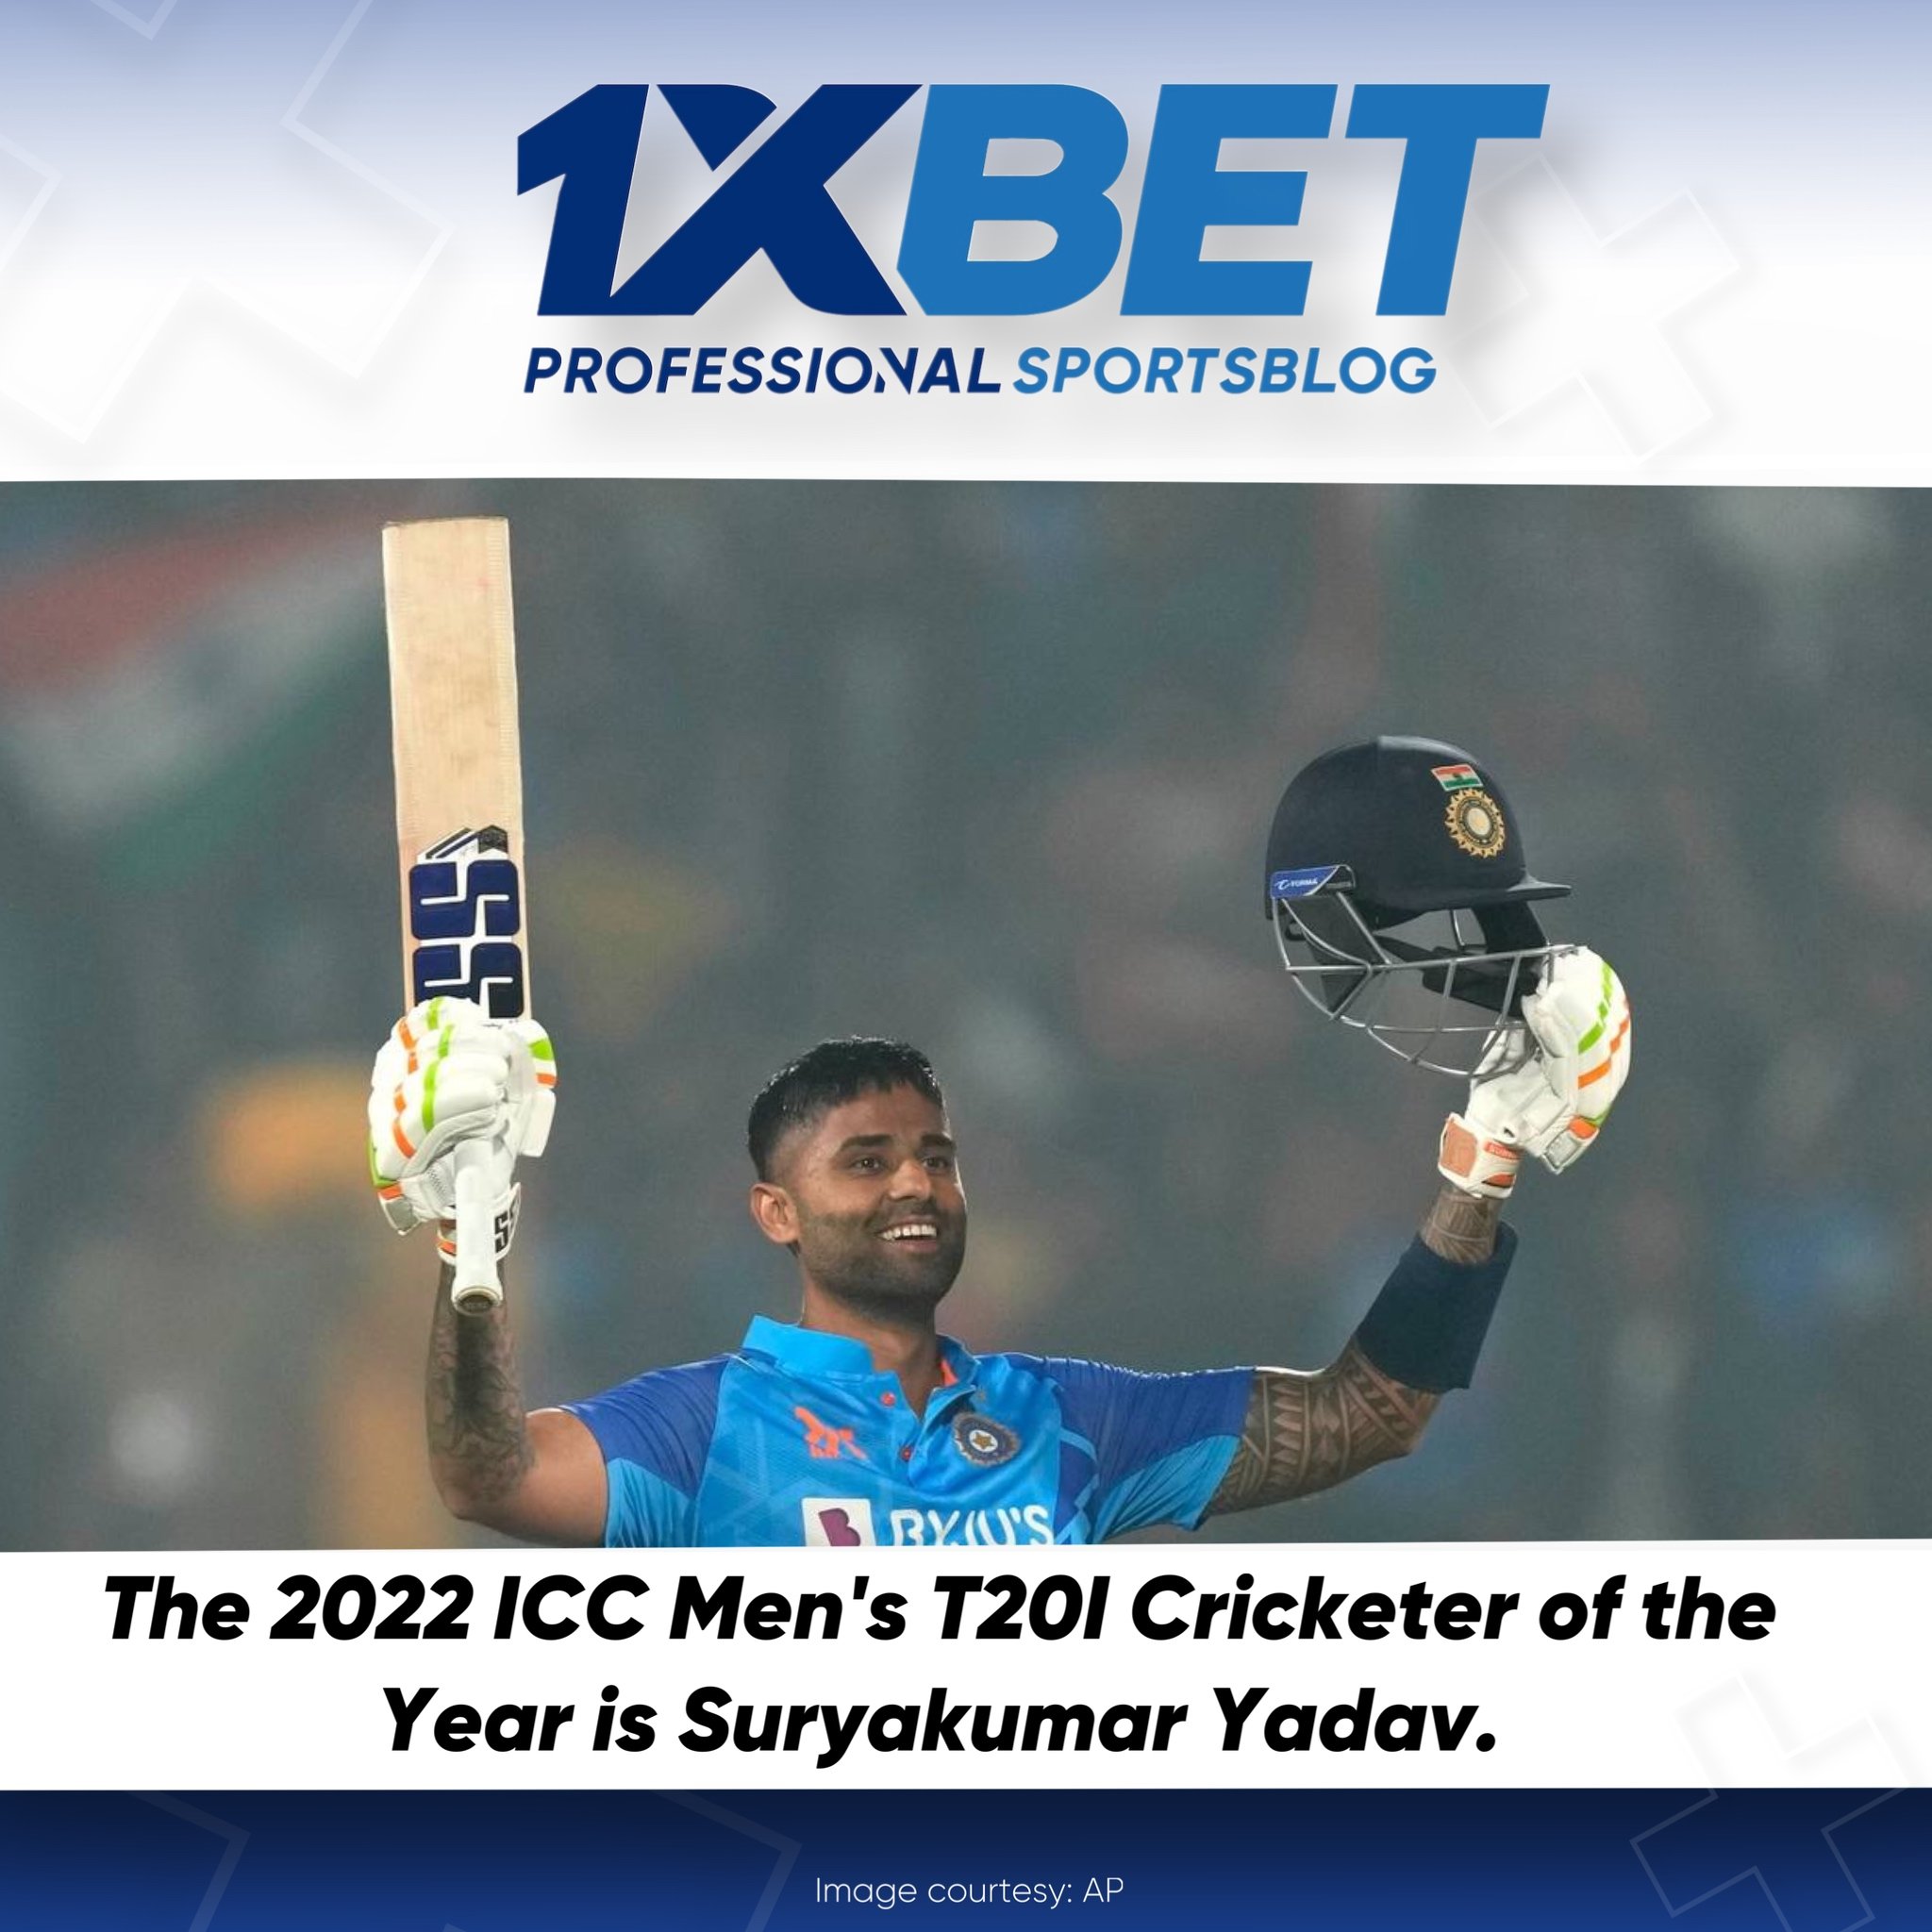 The 2022 ICC Men's T20I Cricketer of the Year is Suryakumar Yadav.